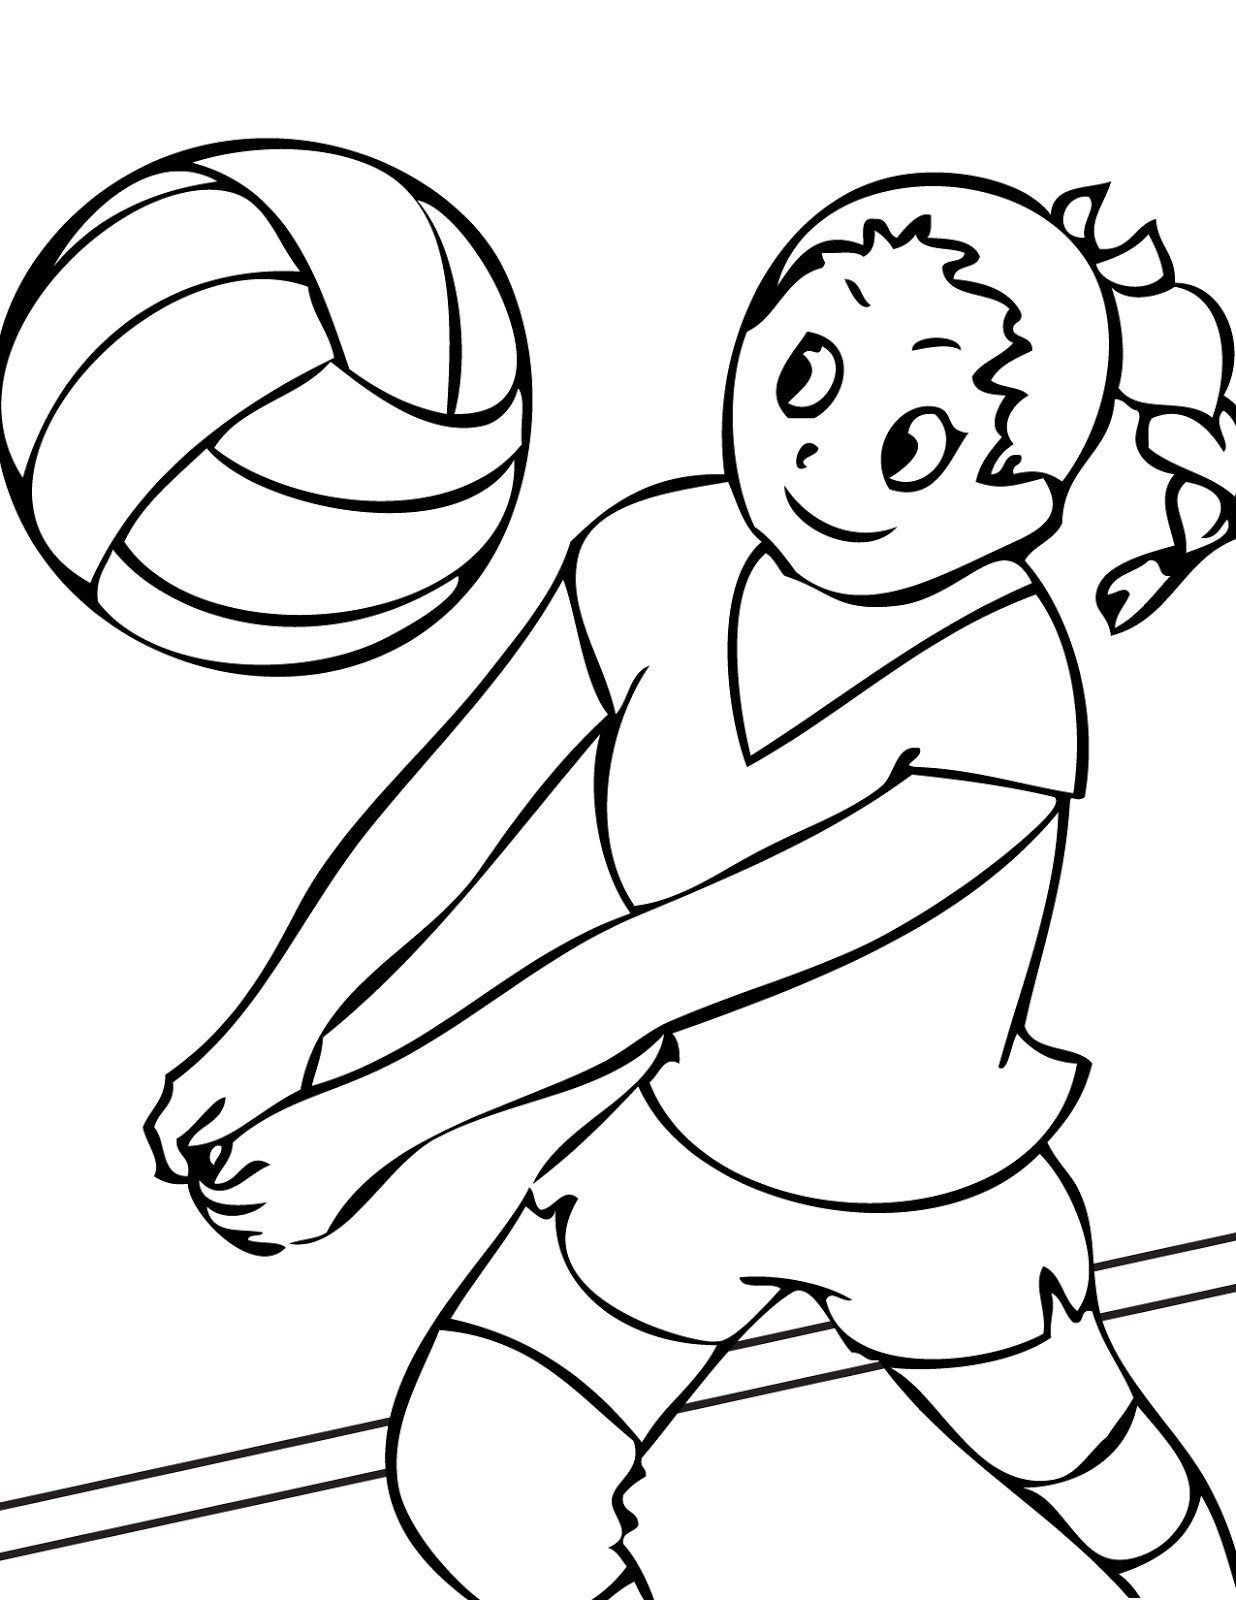 Printable Sports Coloring Pages
 Sports Coloring Pages For Kids